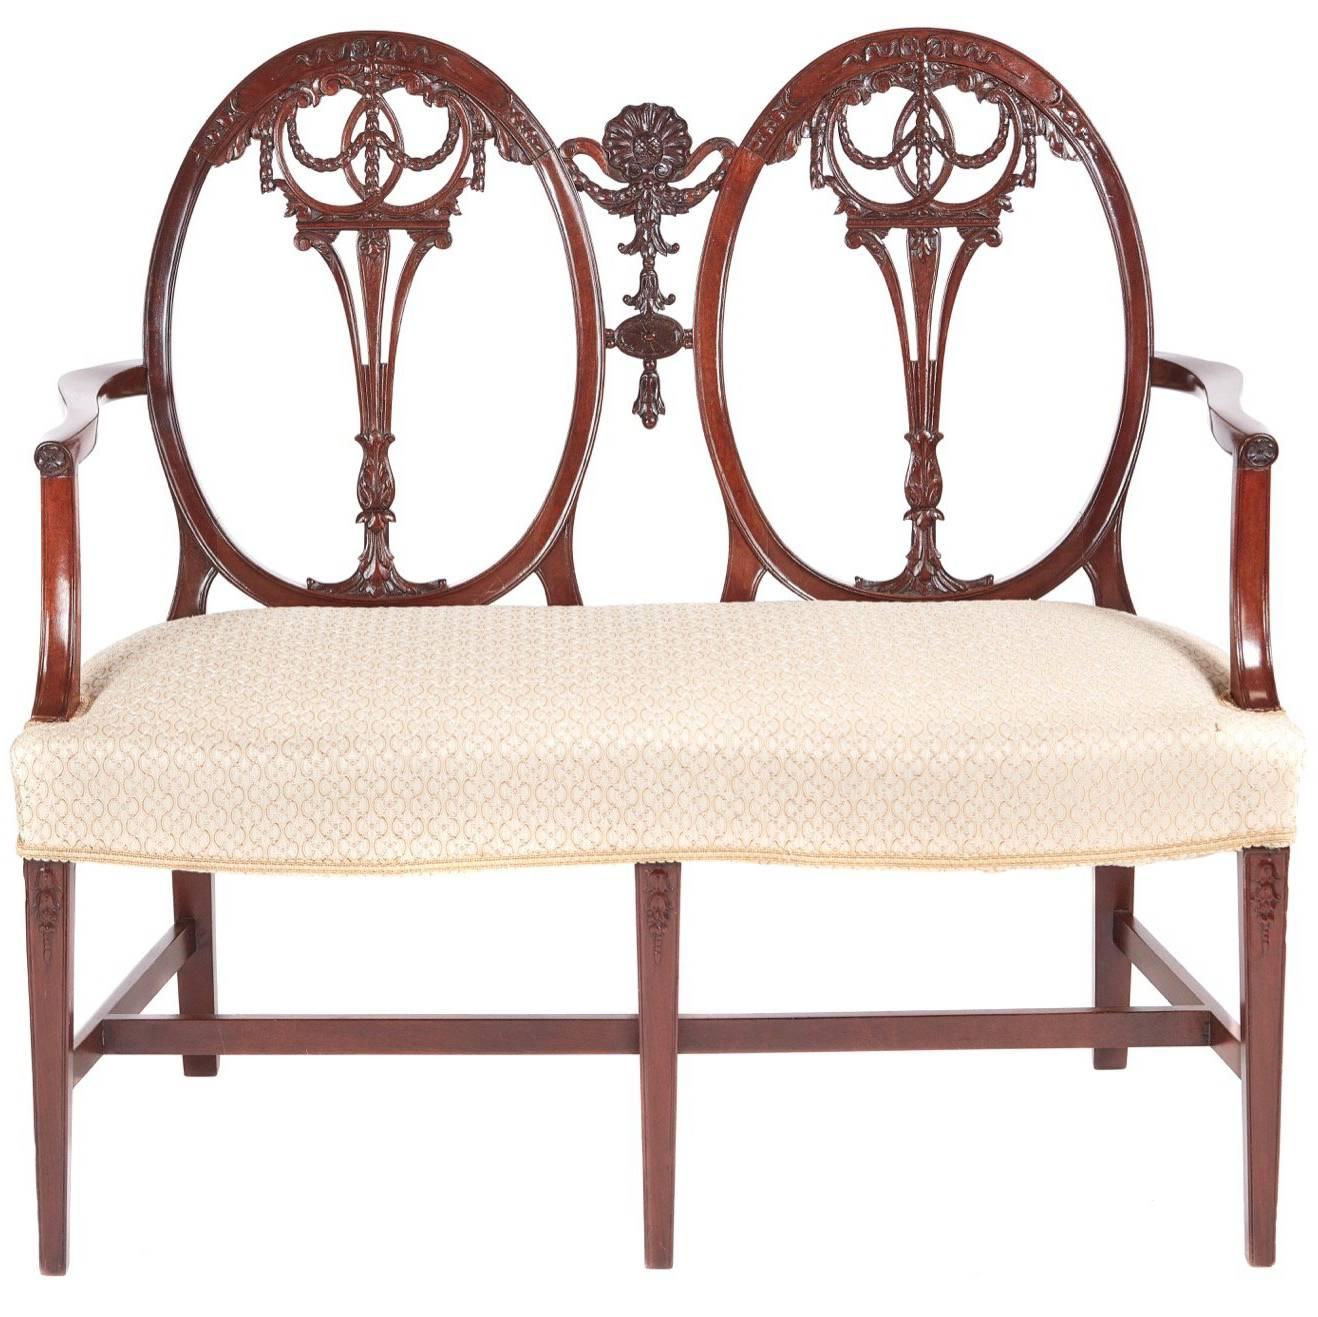 Outstanding Quality Carved Mahogany Settee